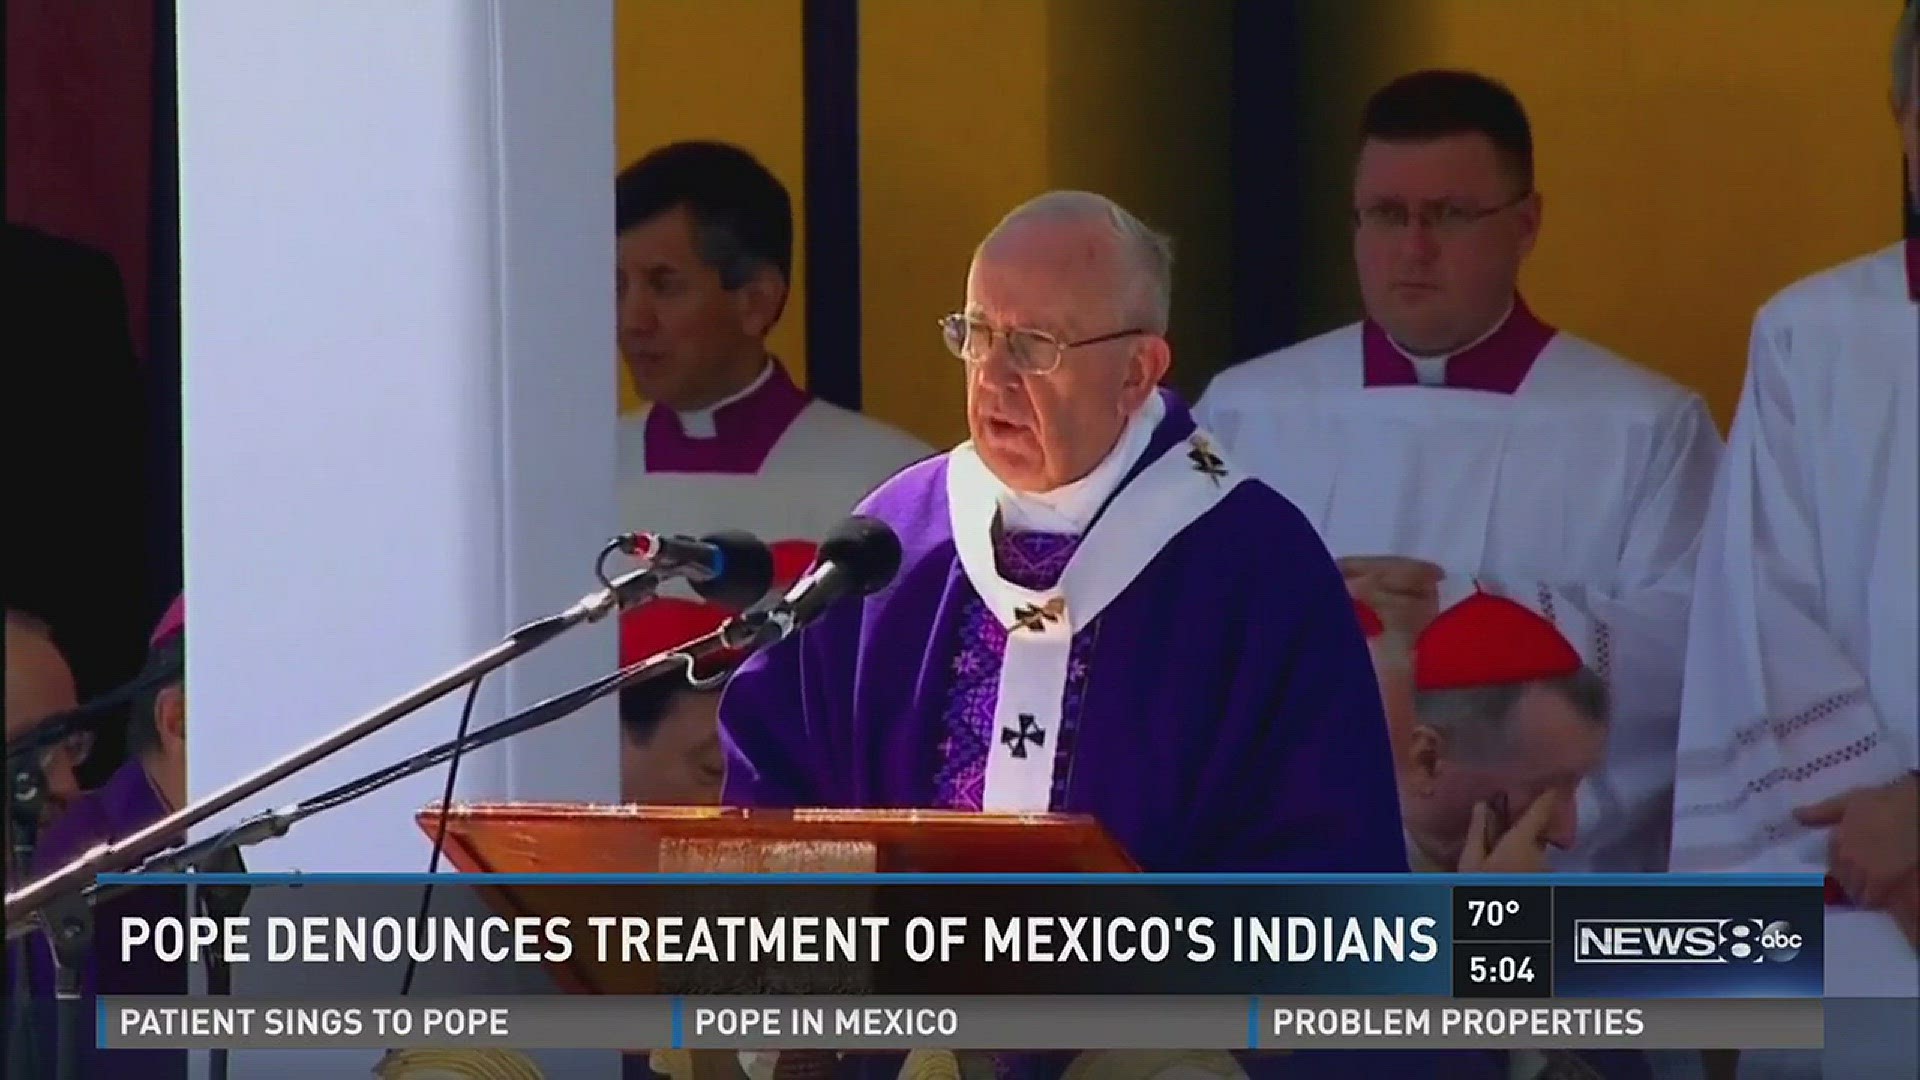 On the third day of his visit to Mexico, Pope Francis met with families, held an outdoor mass, and listened to a young cancer patient sing.